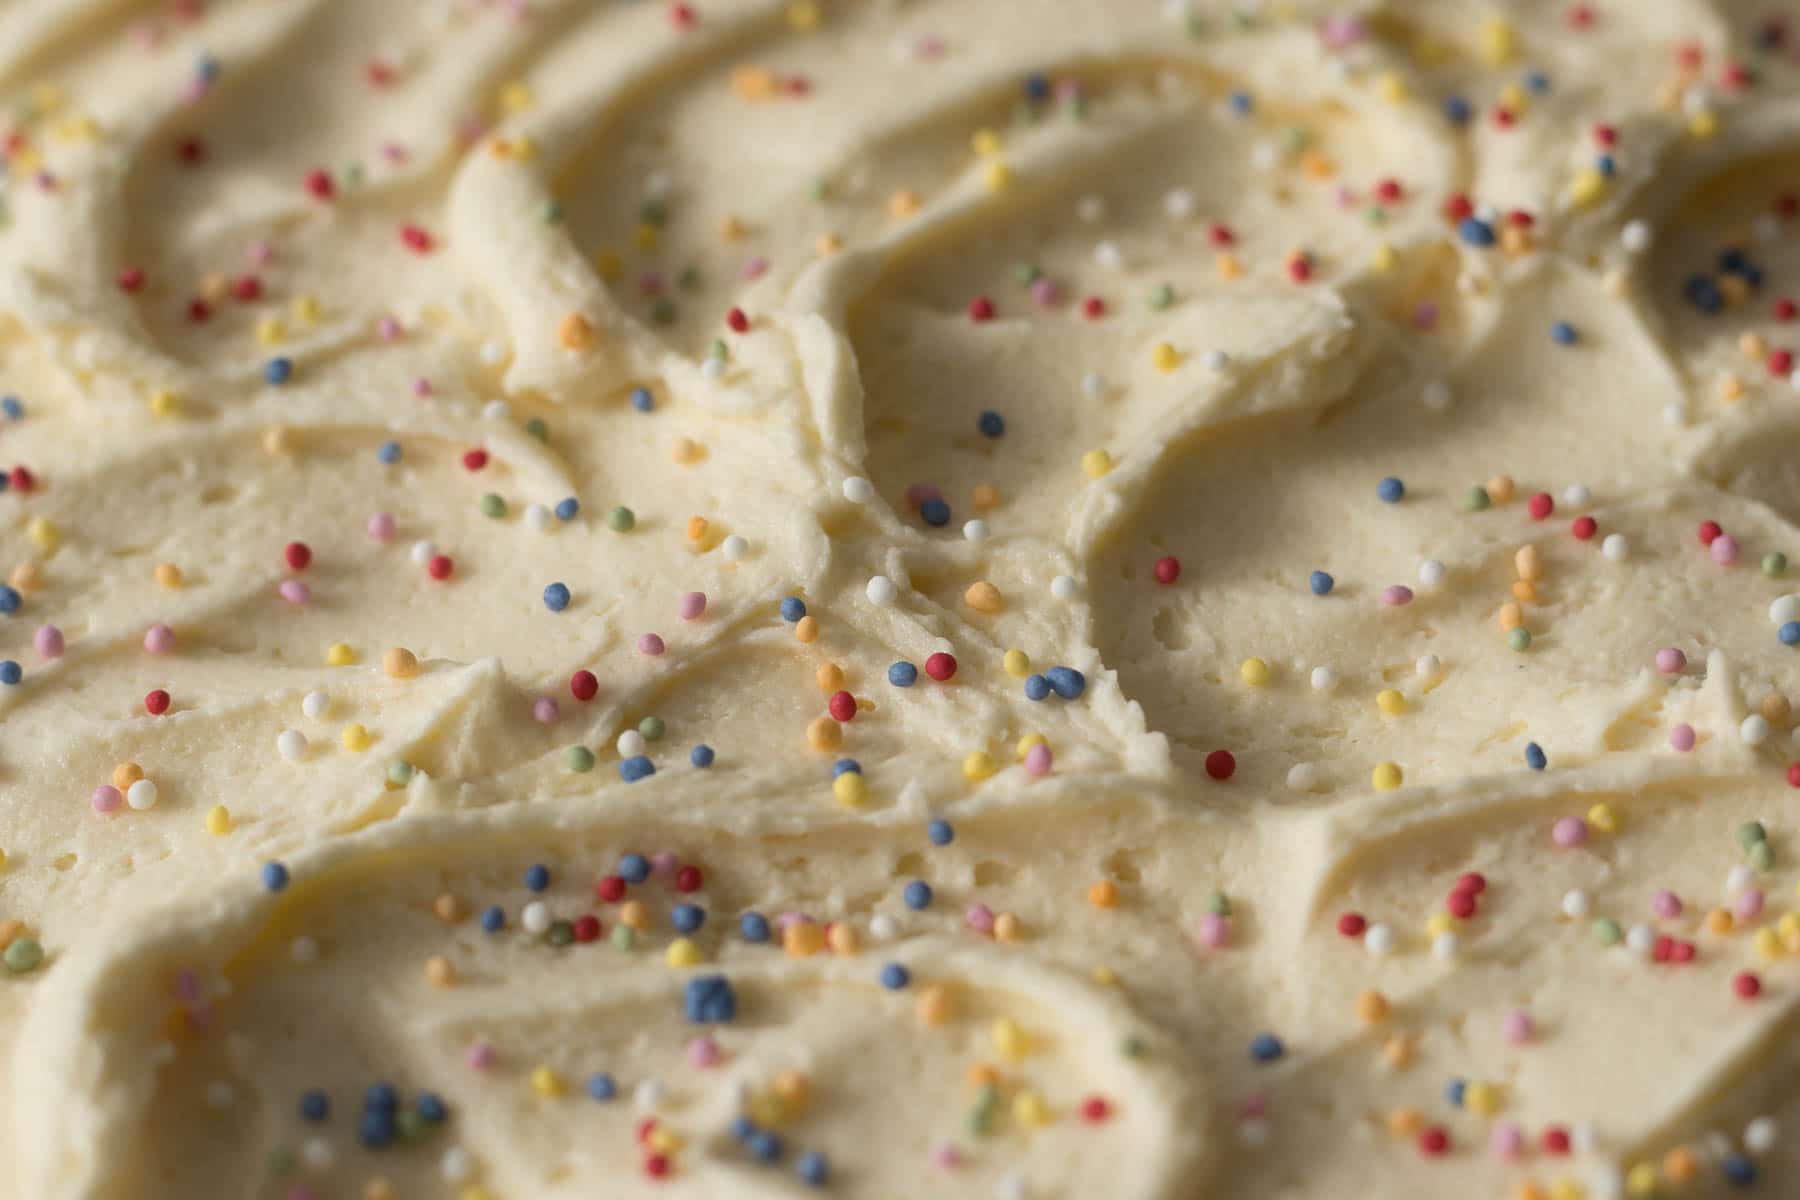 Close up of vanilla buttercream frosting swirled on top of tray bake with sprinkles.